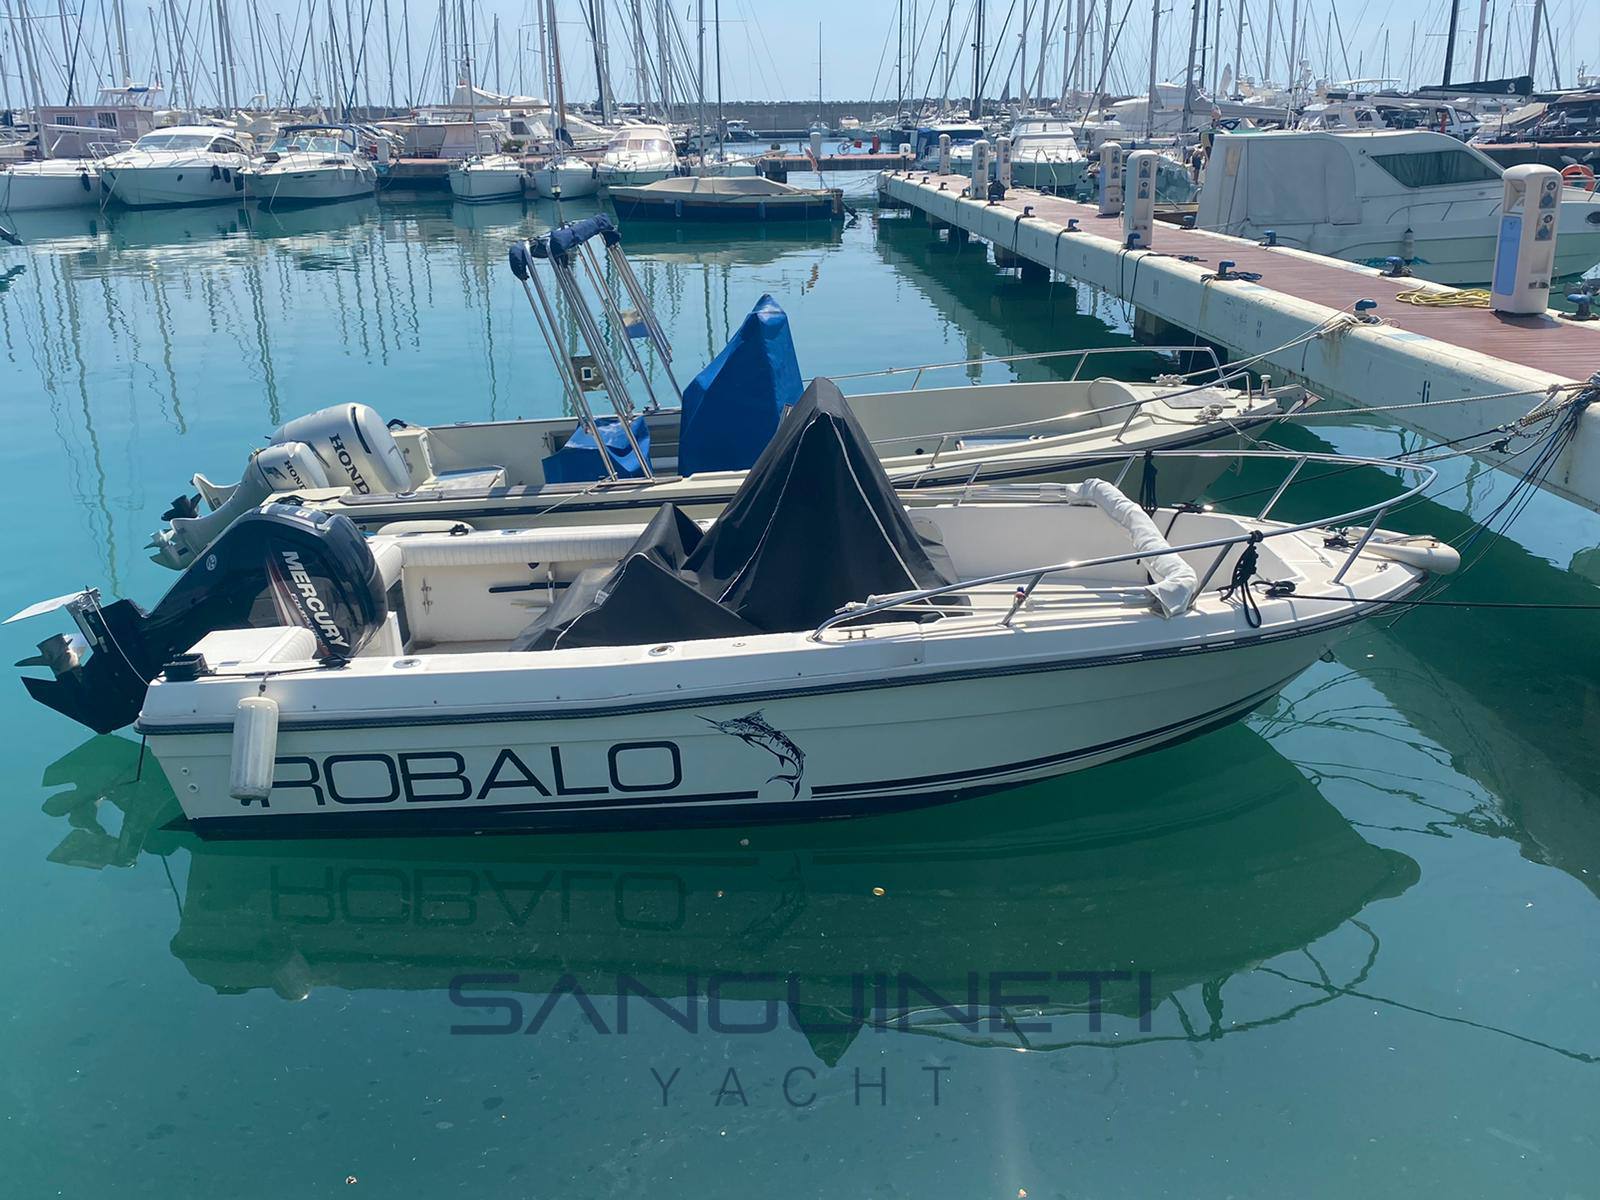 Robalo 1820 Motor boat used for sale